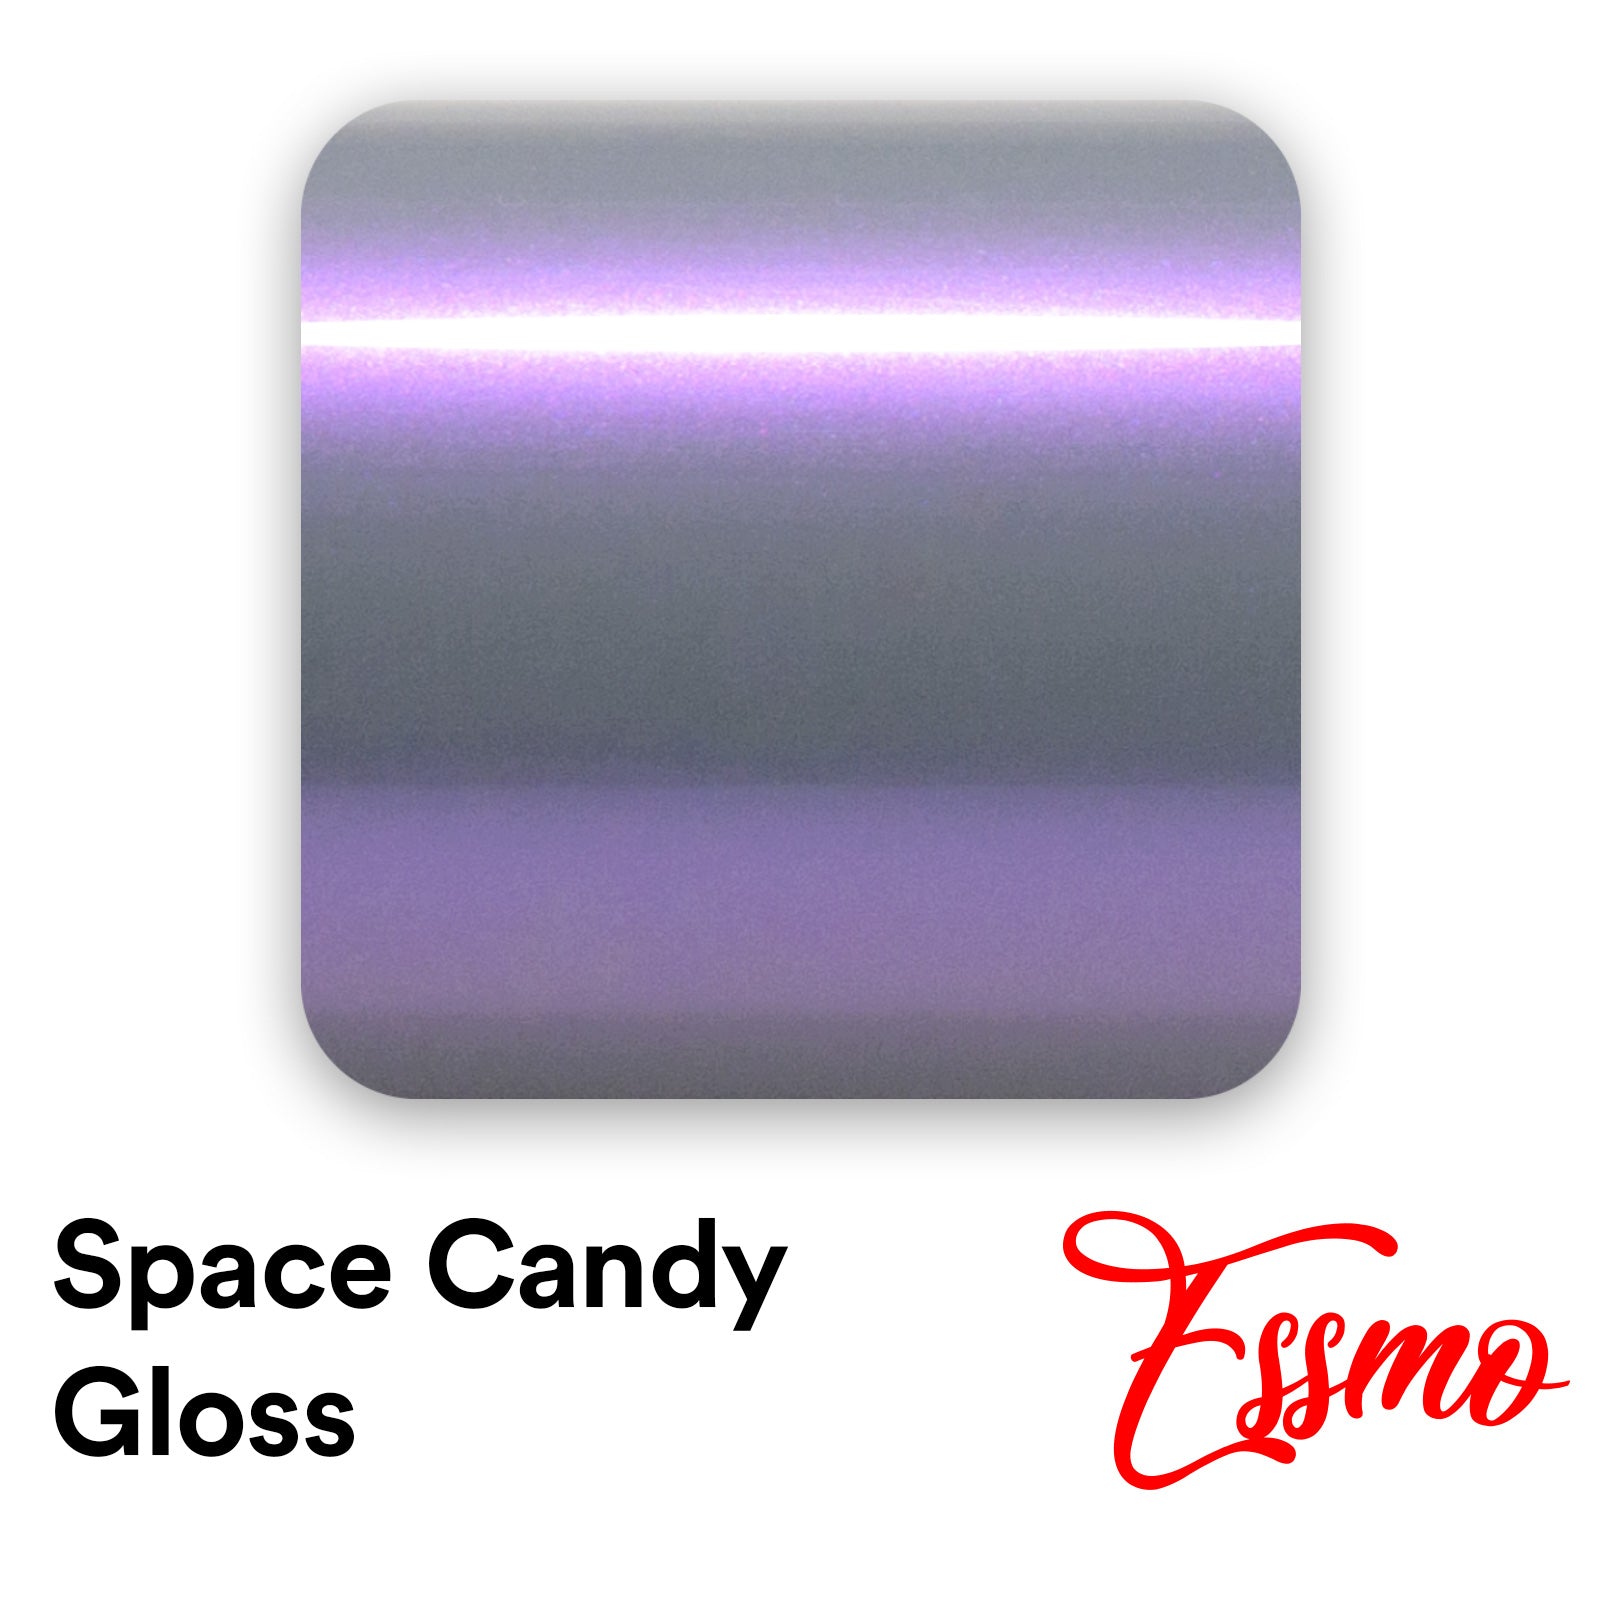 High Glossy with Pearl Purple Self Adhesive Vinyl Contact Paper